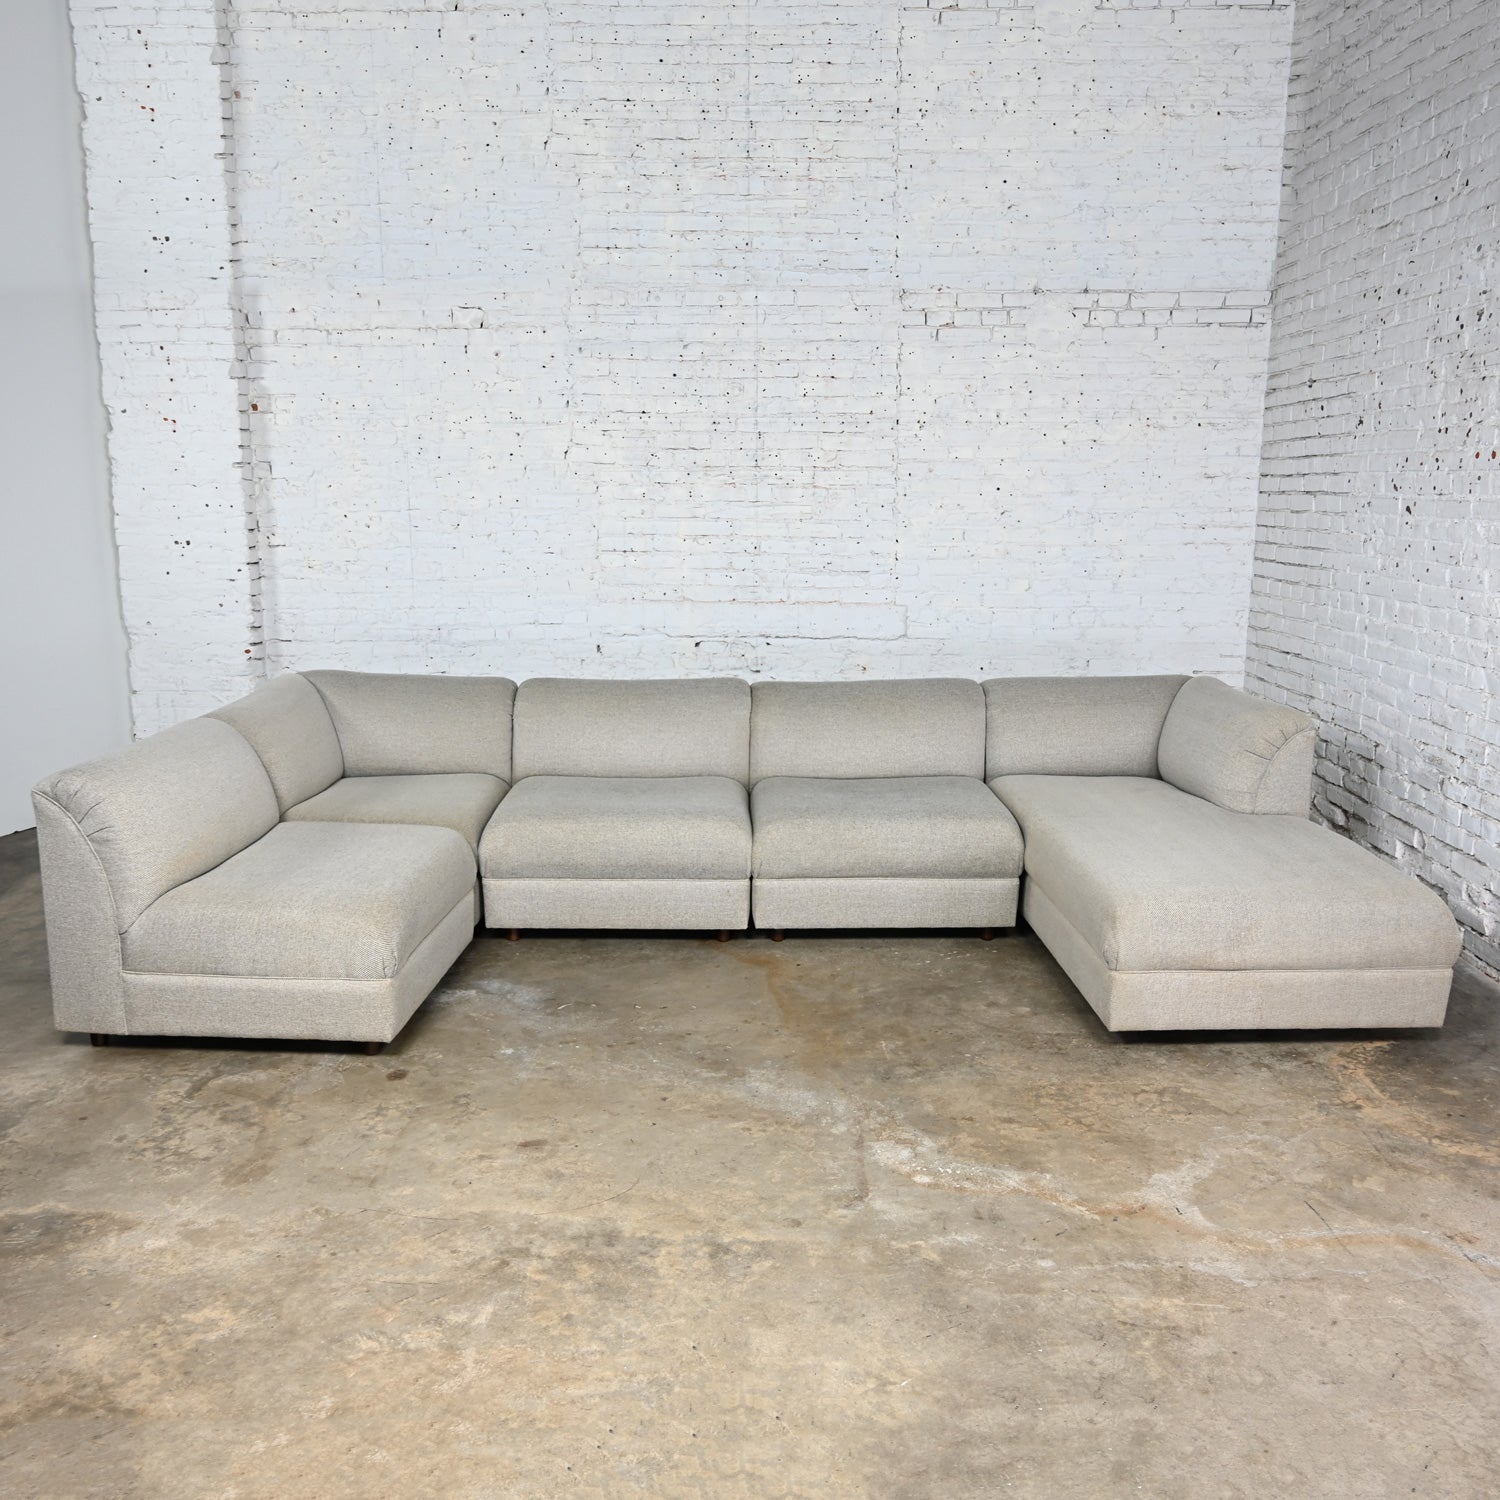 Wonderful Late 20th Century Modern modular sectional sofa 5 pieces with chaise and gray tweed like fabric. Comprised of 3 armless sections, a corner piece, and a chaise lounge with tight seat & back foam cushions and cylindrical wood legs with a